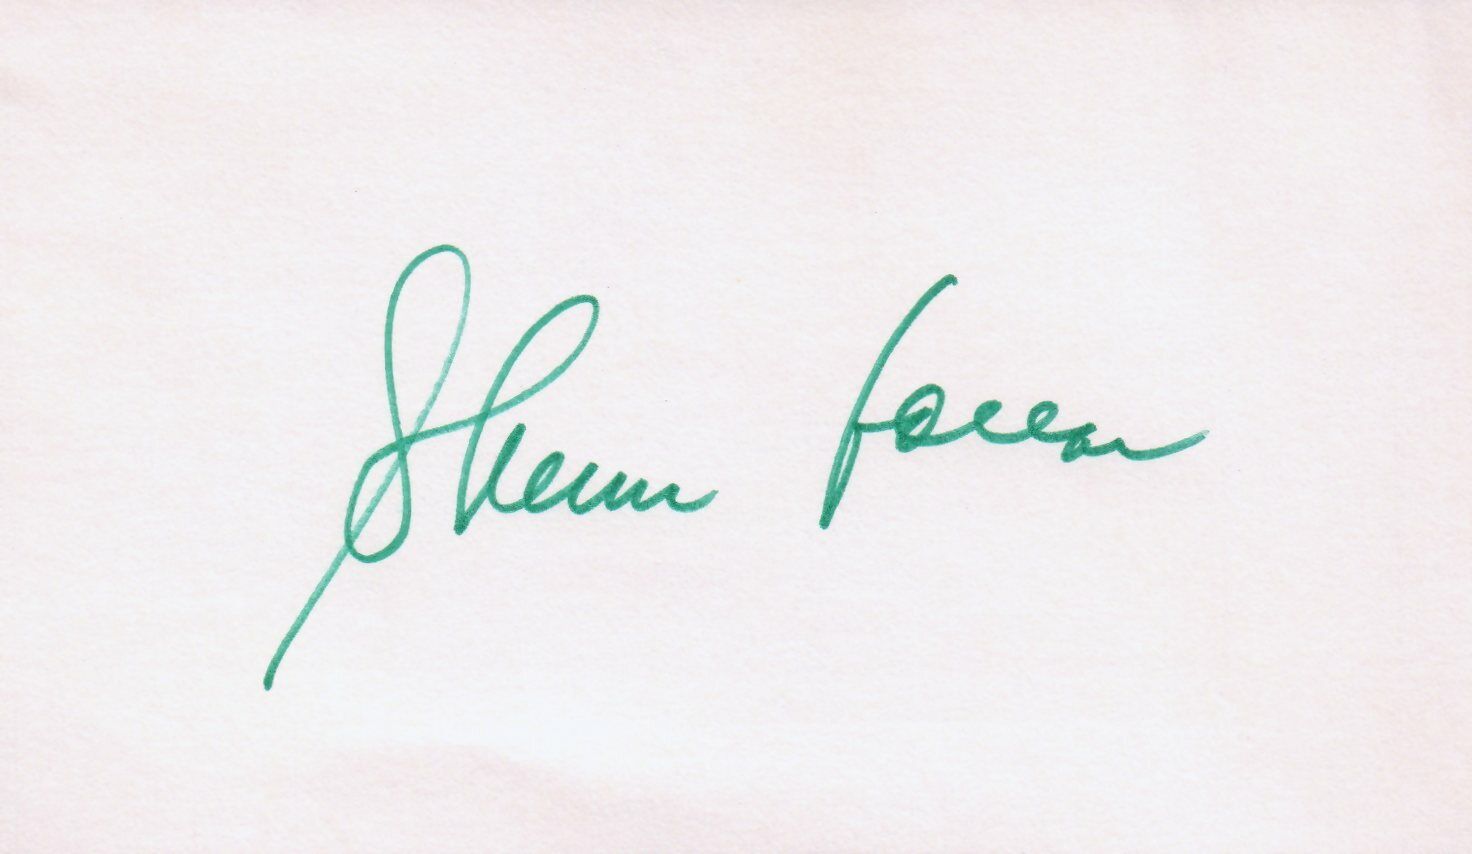 Sherm Lollar 1959 White Sox Deceased 1977 Signed 3x5 Index Card with JSA COA